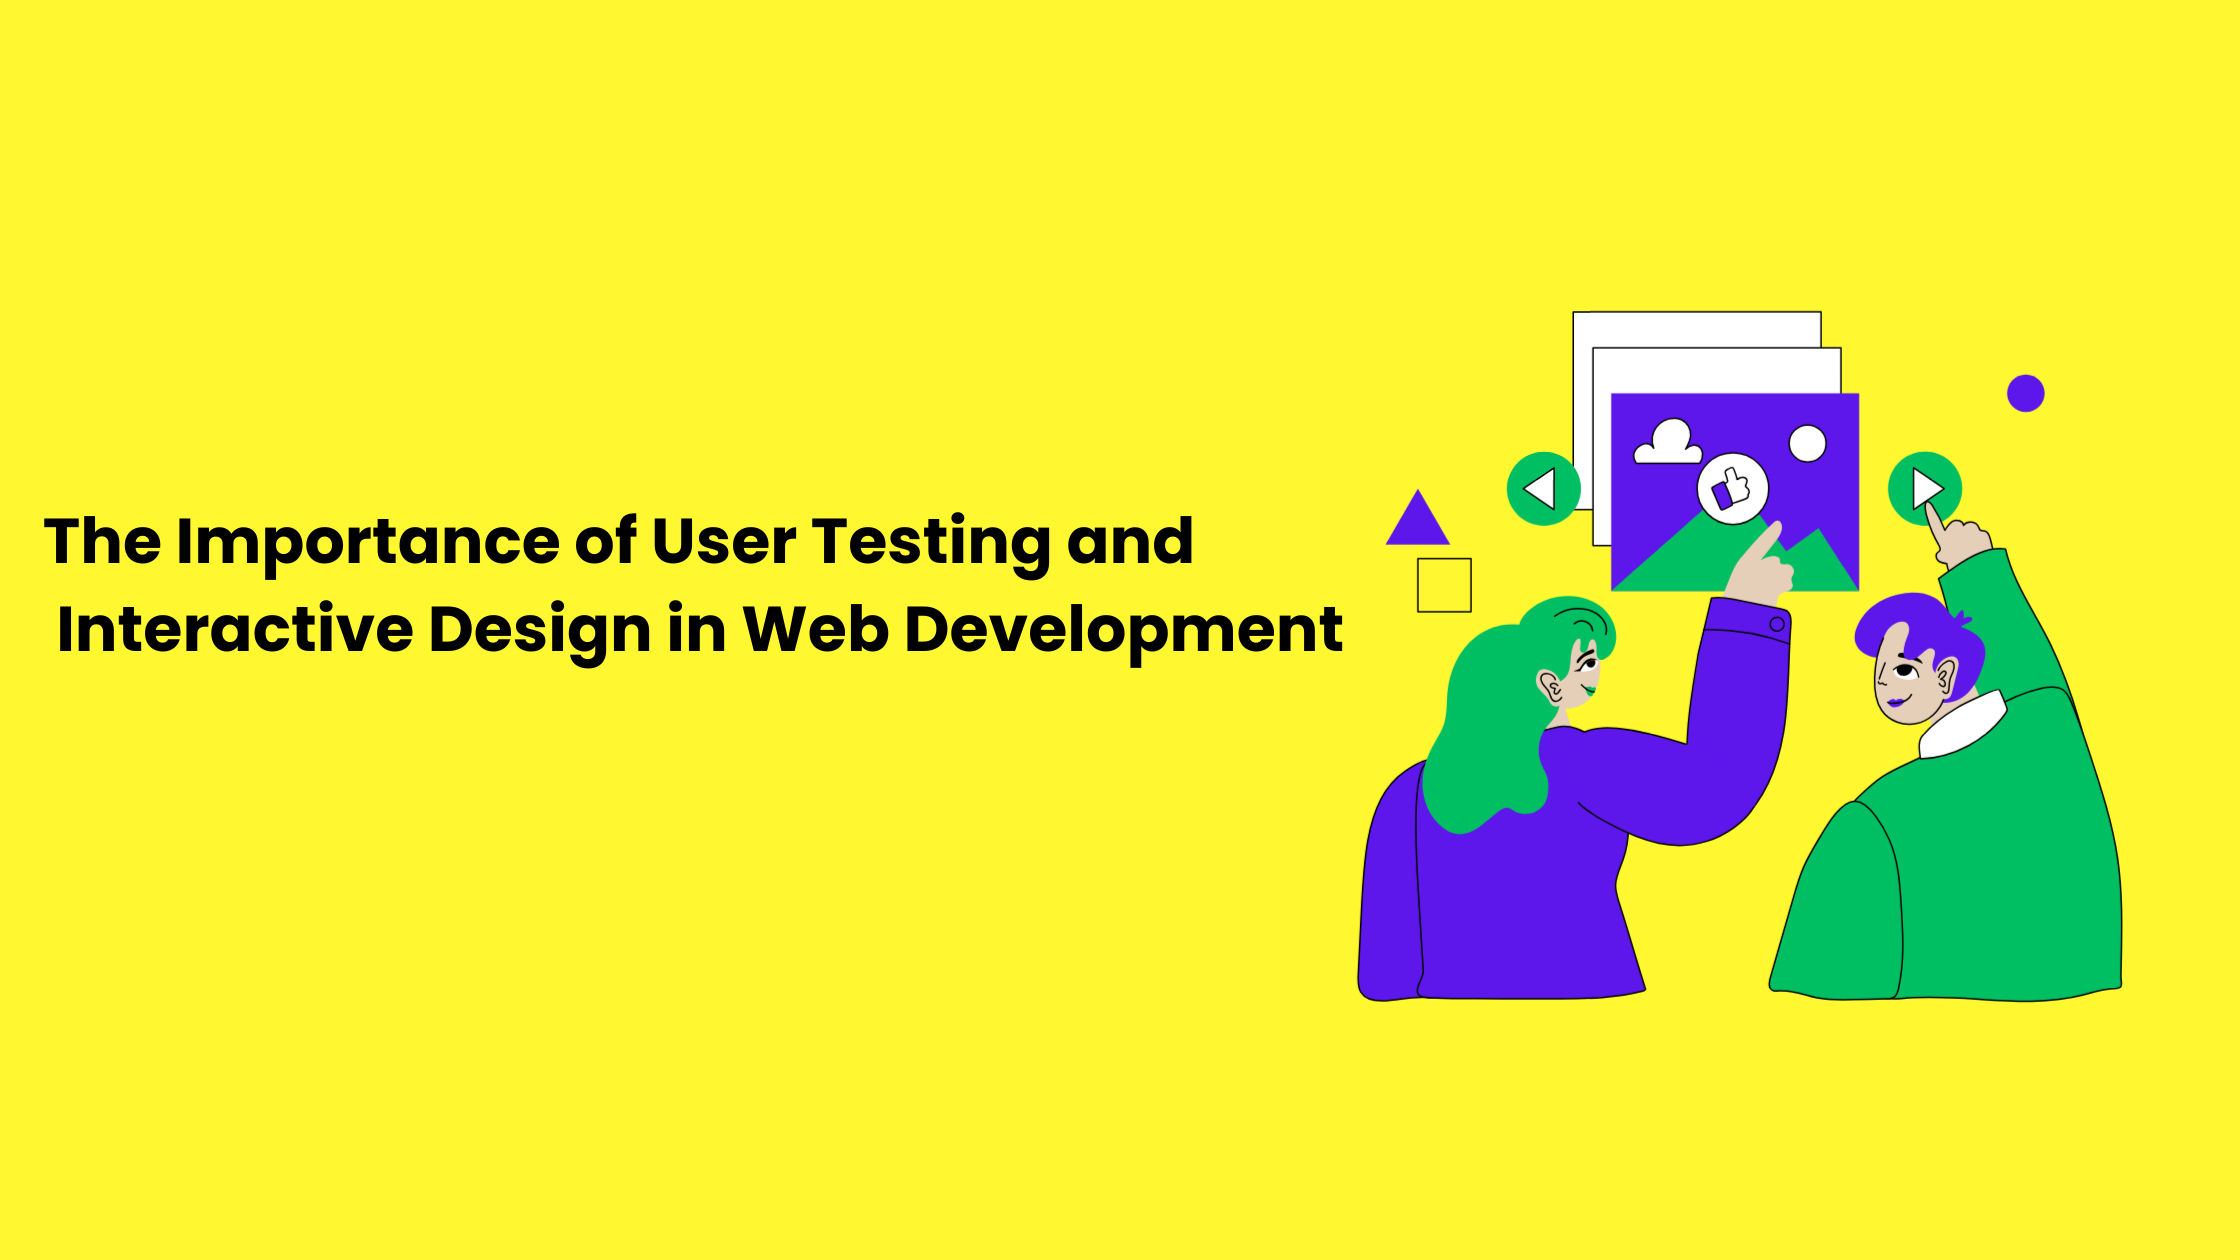 The Importance of User Testing and Interactive Design in Web Development